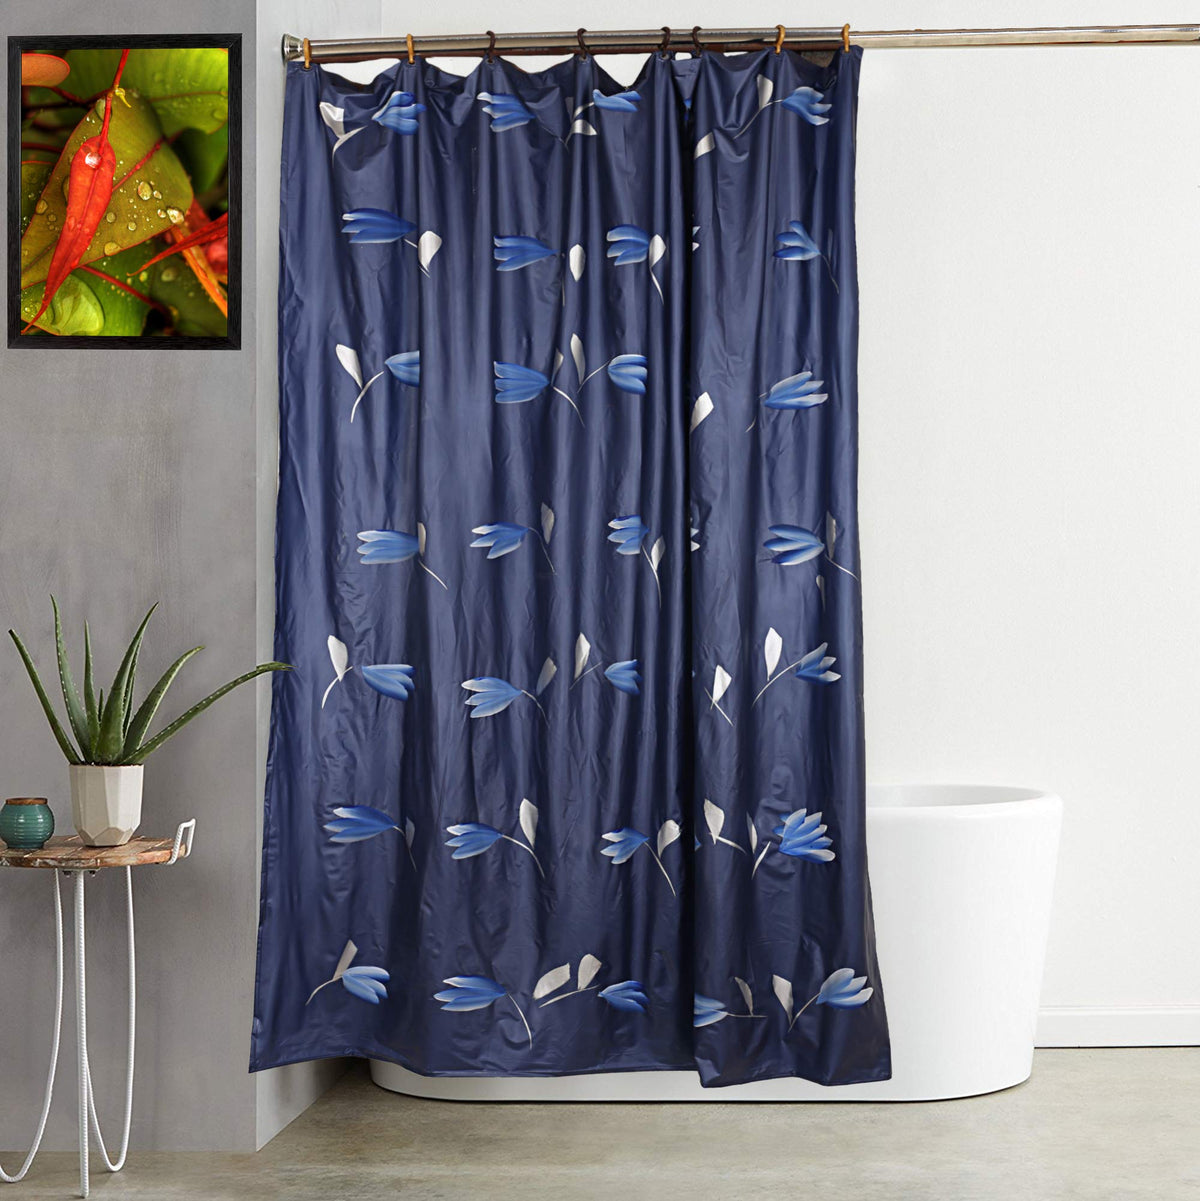 Kuber Industries PVC Shower Panting Curtain, (CTKTC01562, Blue, 54x84 Inch), Washable